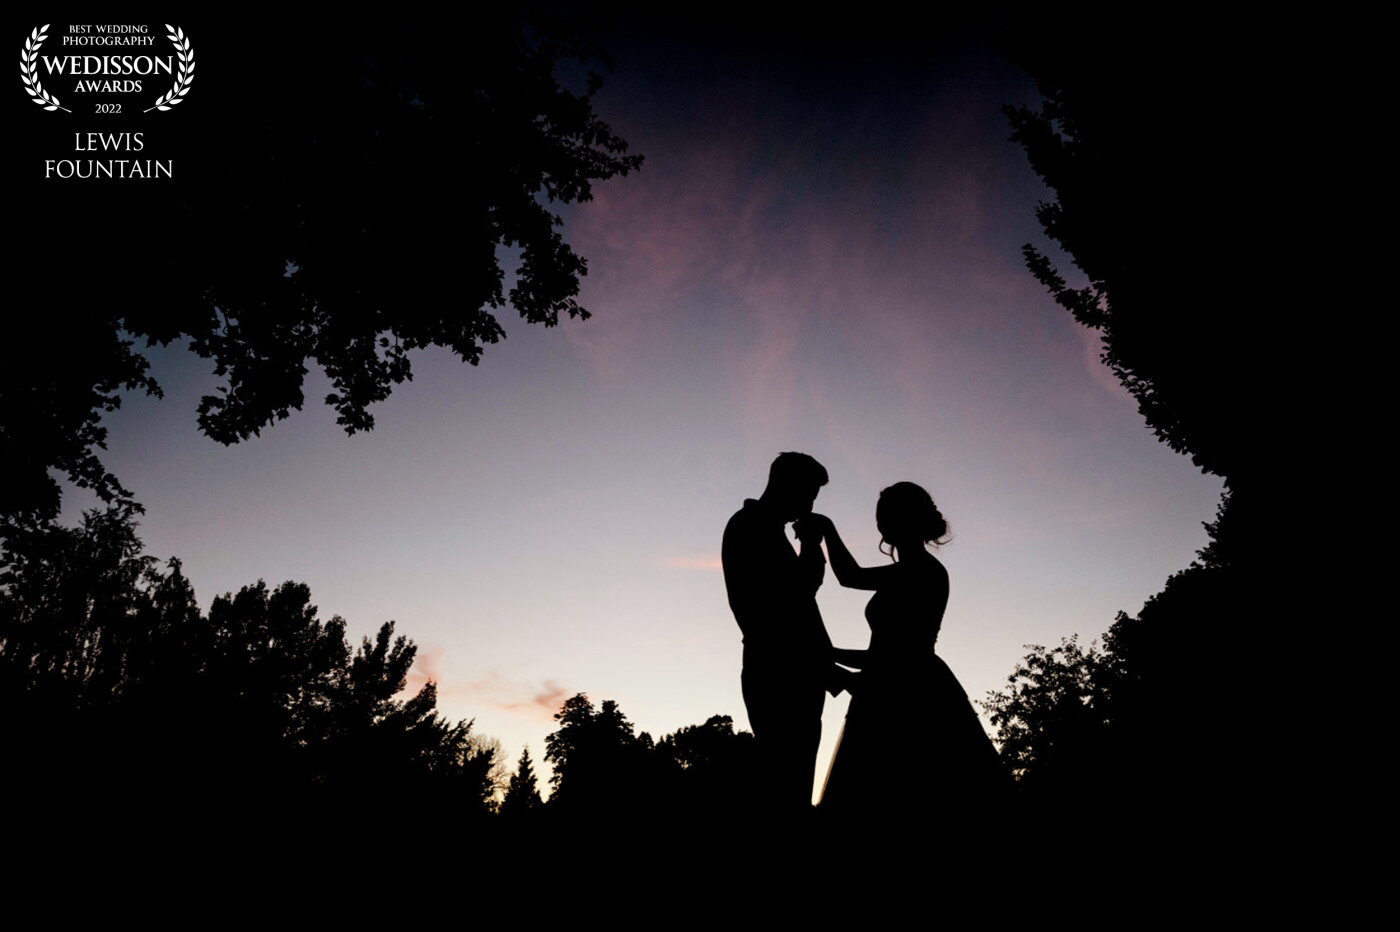 Nicole and Ollies wedding at Chippenham Park was an awesome day, packed full of amazing photographic opportunities. While we were waiting for a sunset when I spotted this area off trees, which I knew would give a perfect silhouette with a natural vignette.